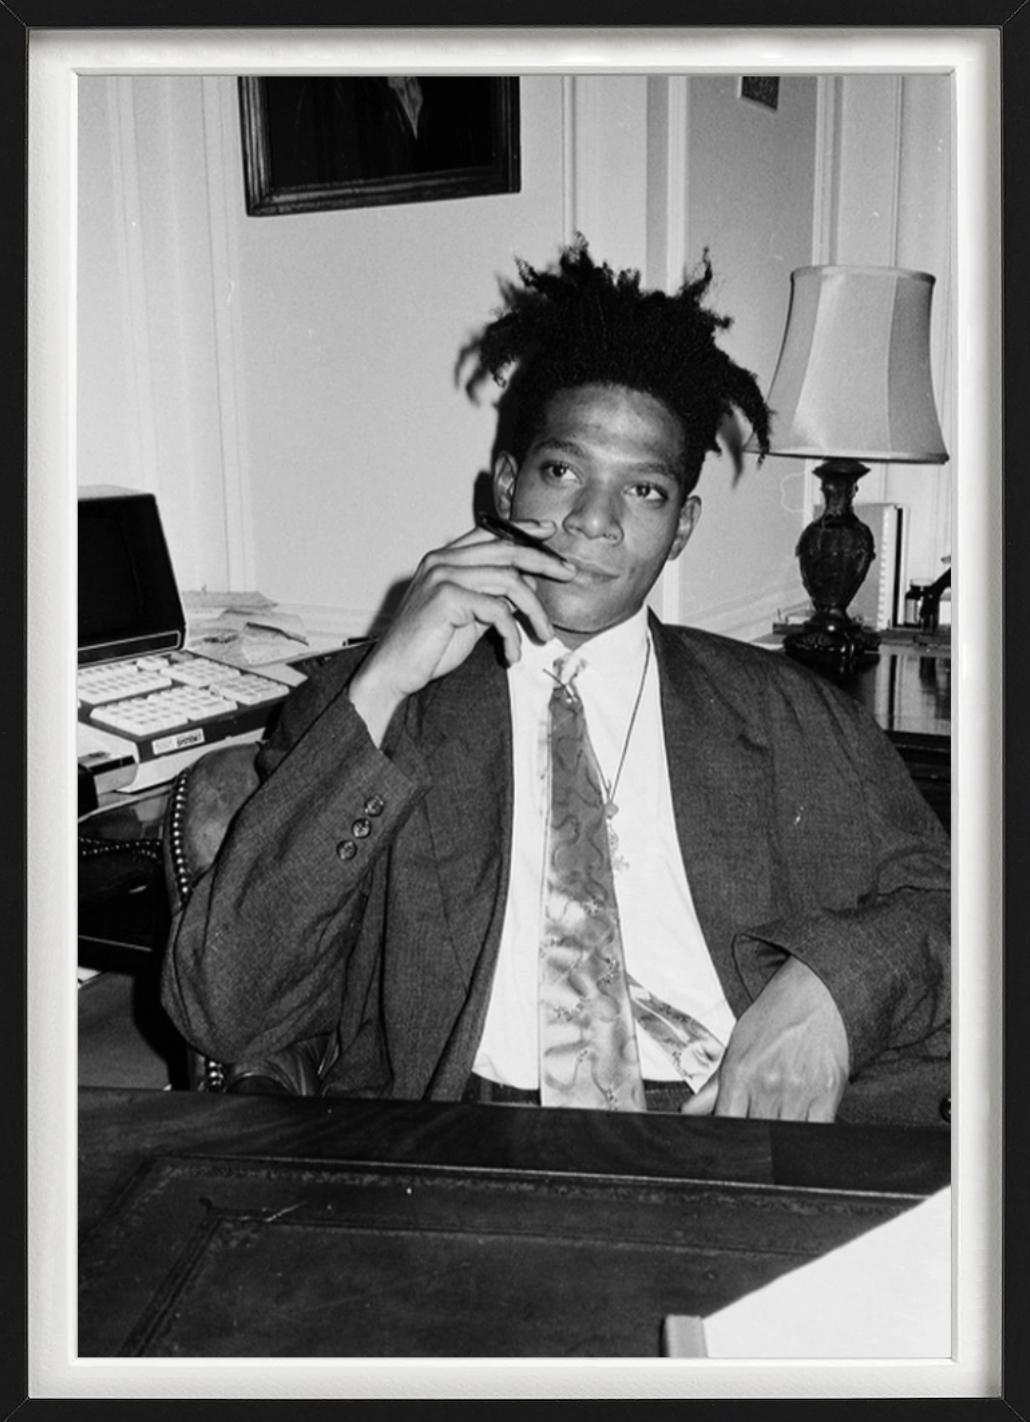 Black and white portrait of the young artist Jean-Michel Basquiat in a suit, sitting at a table, photographed by Roxanne Lowit in 1985.

All prints are limited edition. Available in multiple sizes. High-end framing on request.

All prints are done